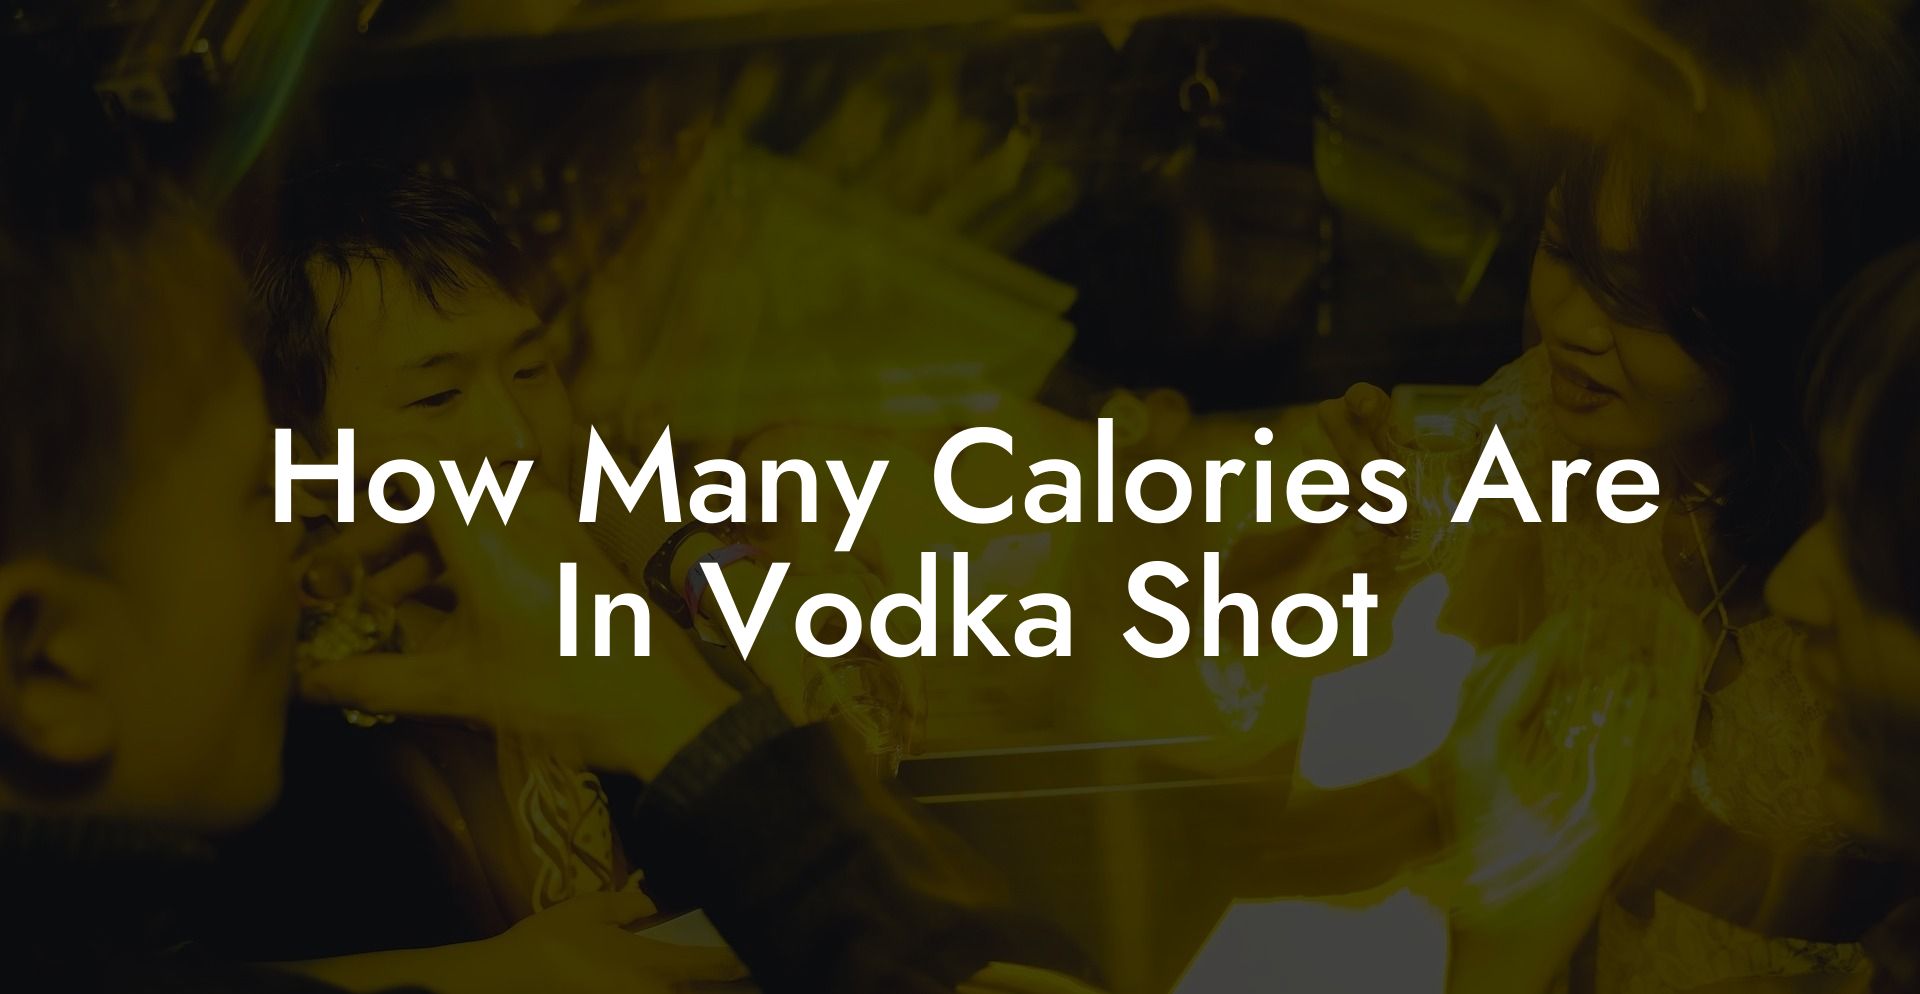 How Many Calories Are In Vodka Shot